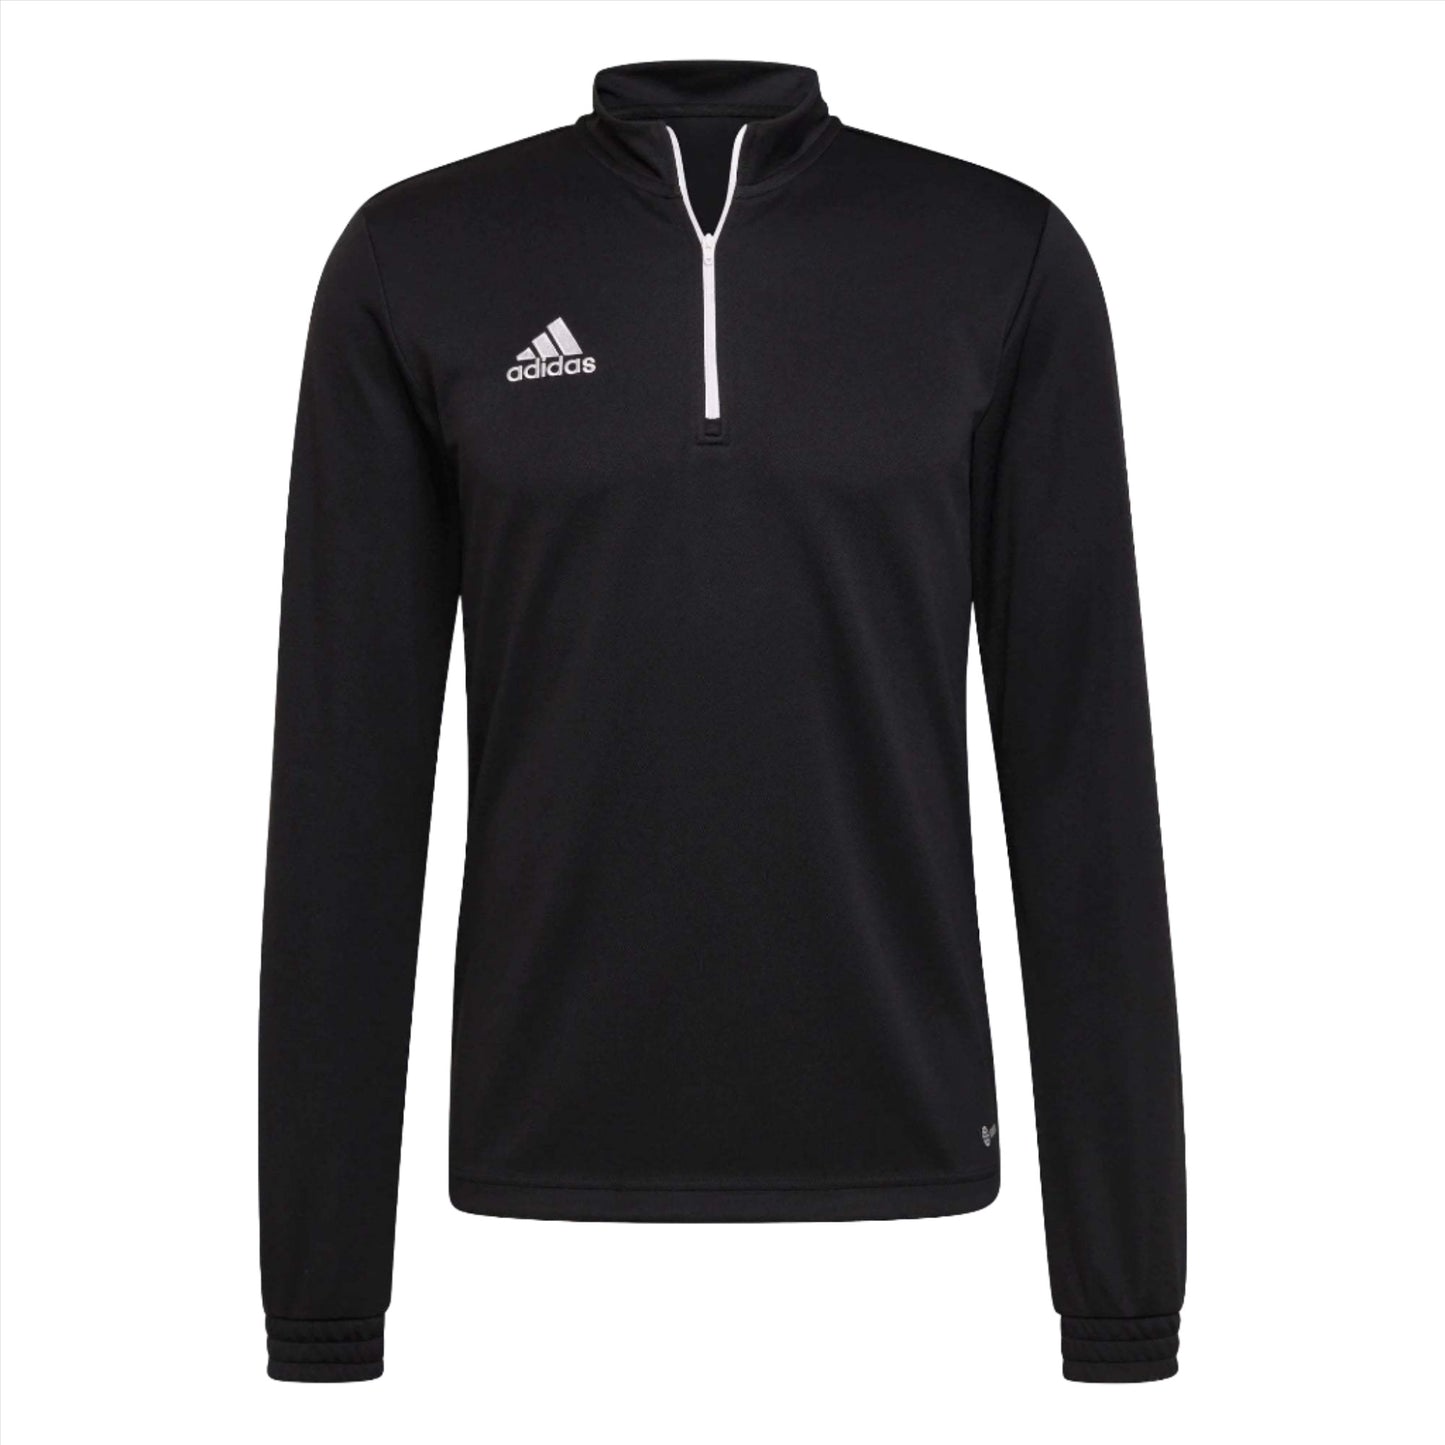 Entrada 22 Training Top by Adidas - The Luxury Promotional Gifts Company Limited